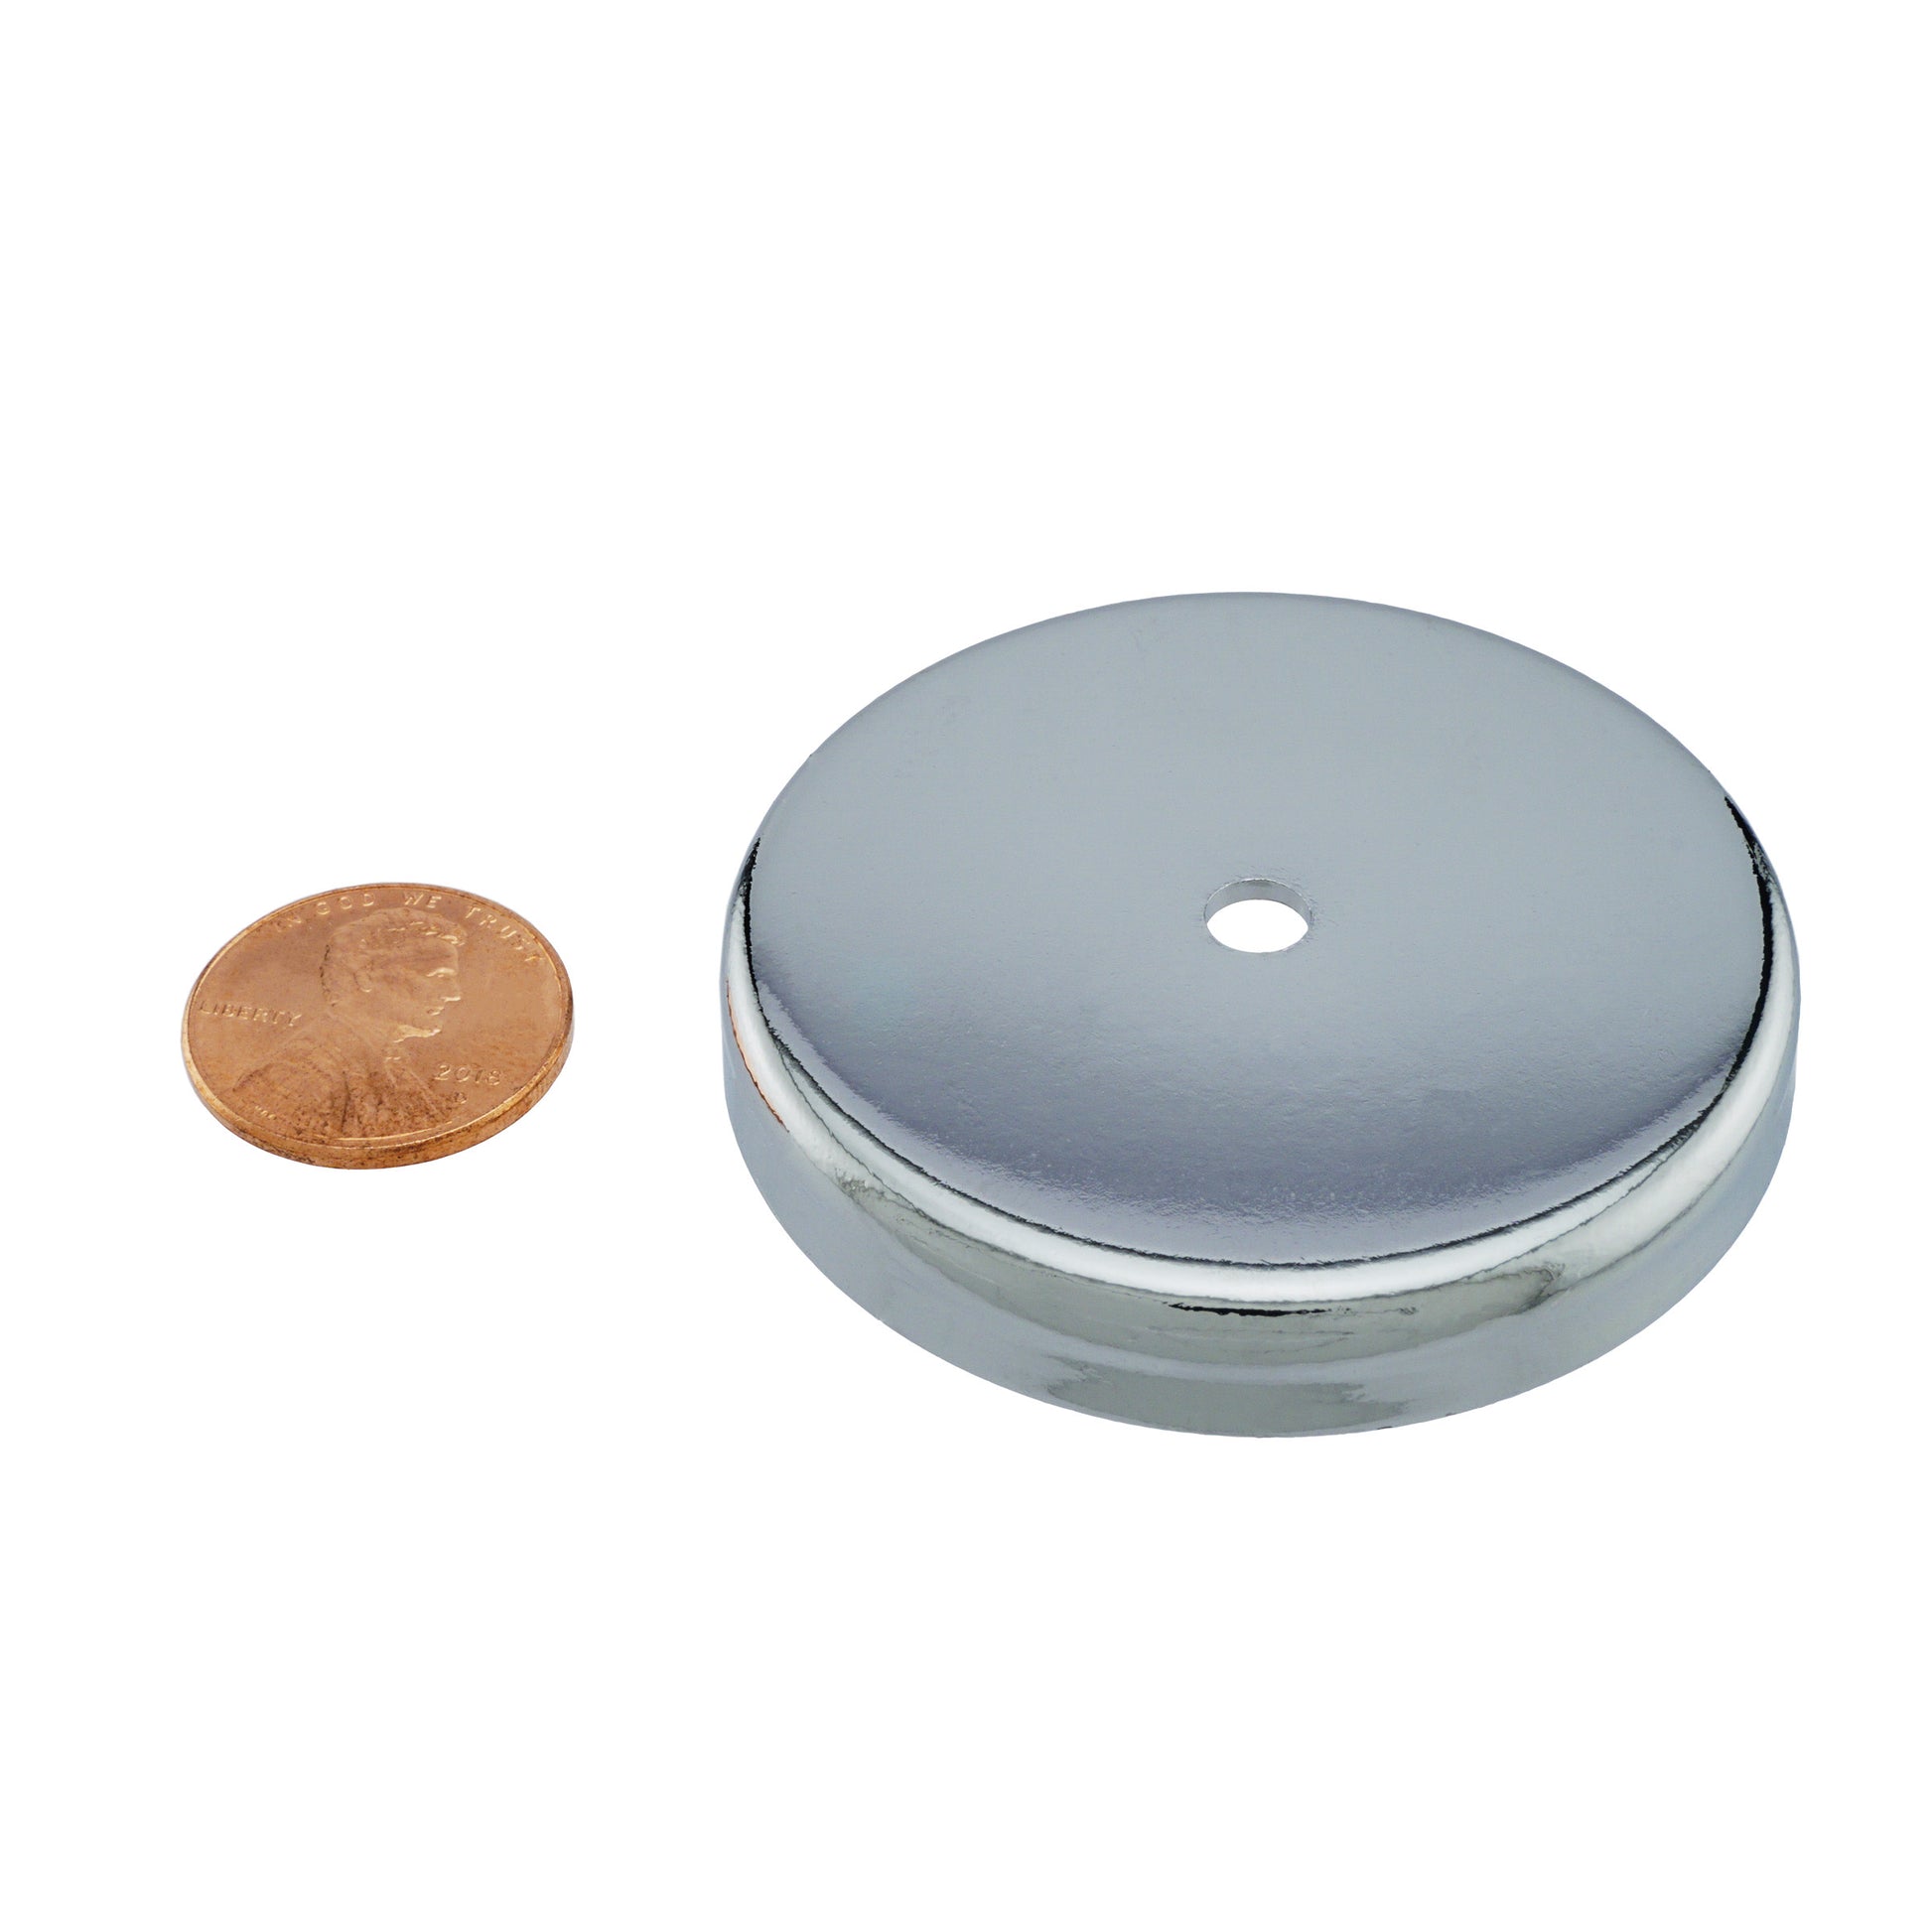 Load image into Gallery viewer, RB50C Ceramic Round Base Magnet - Compared to Penny for Size Reference